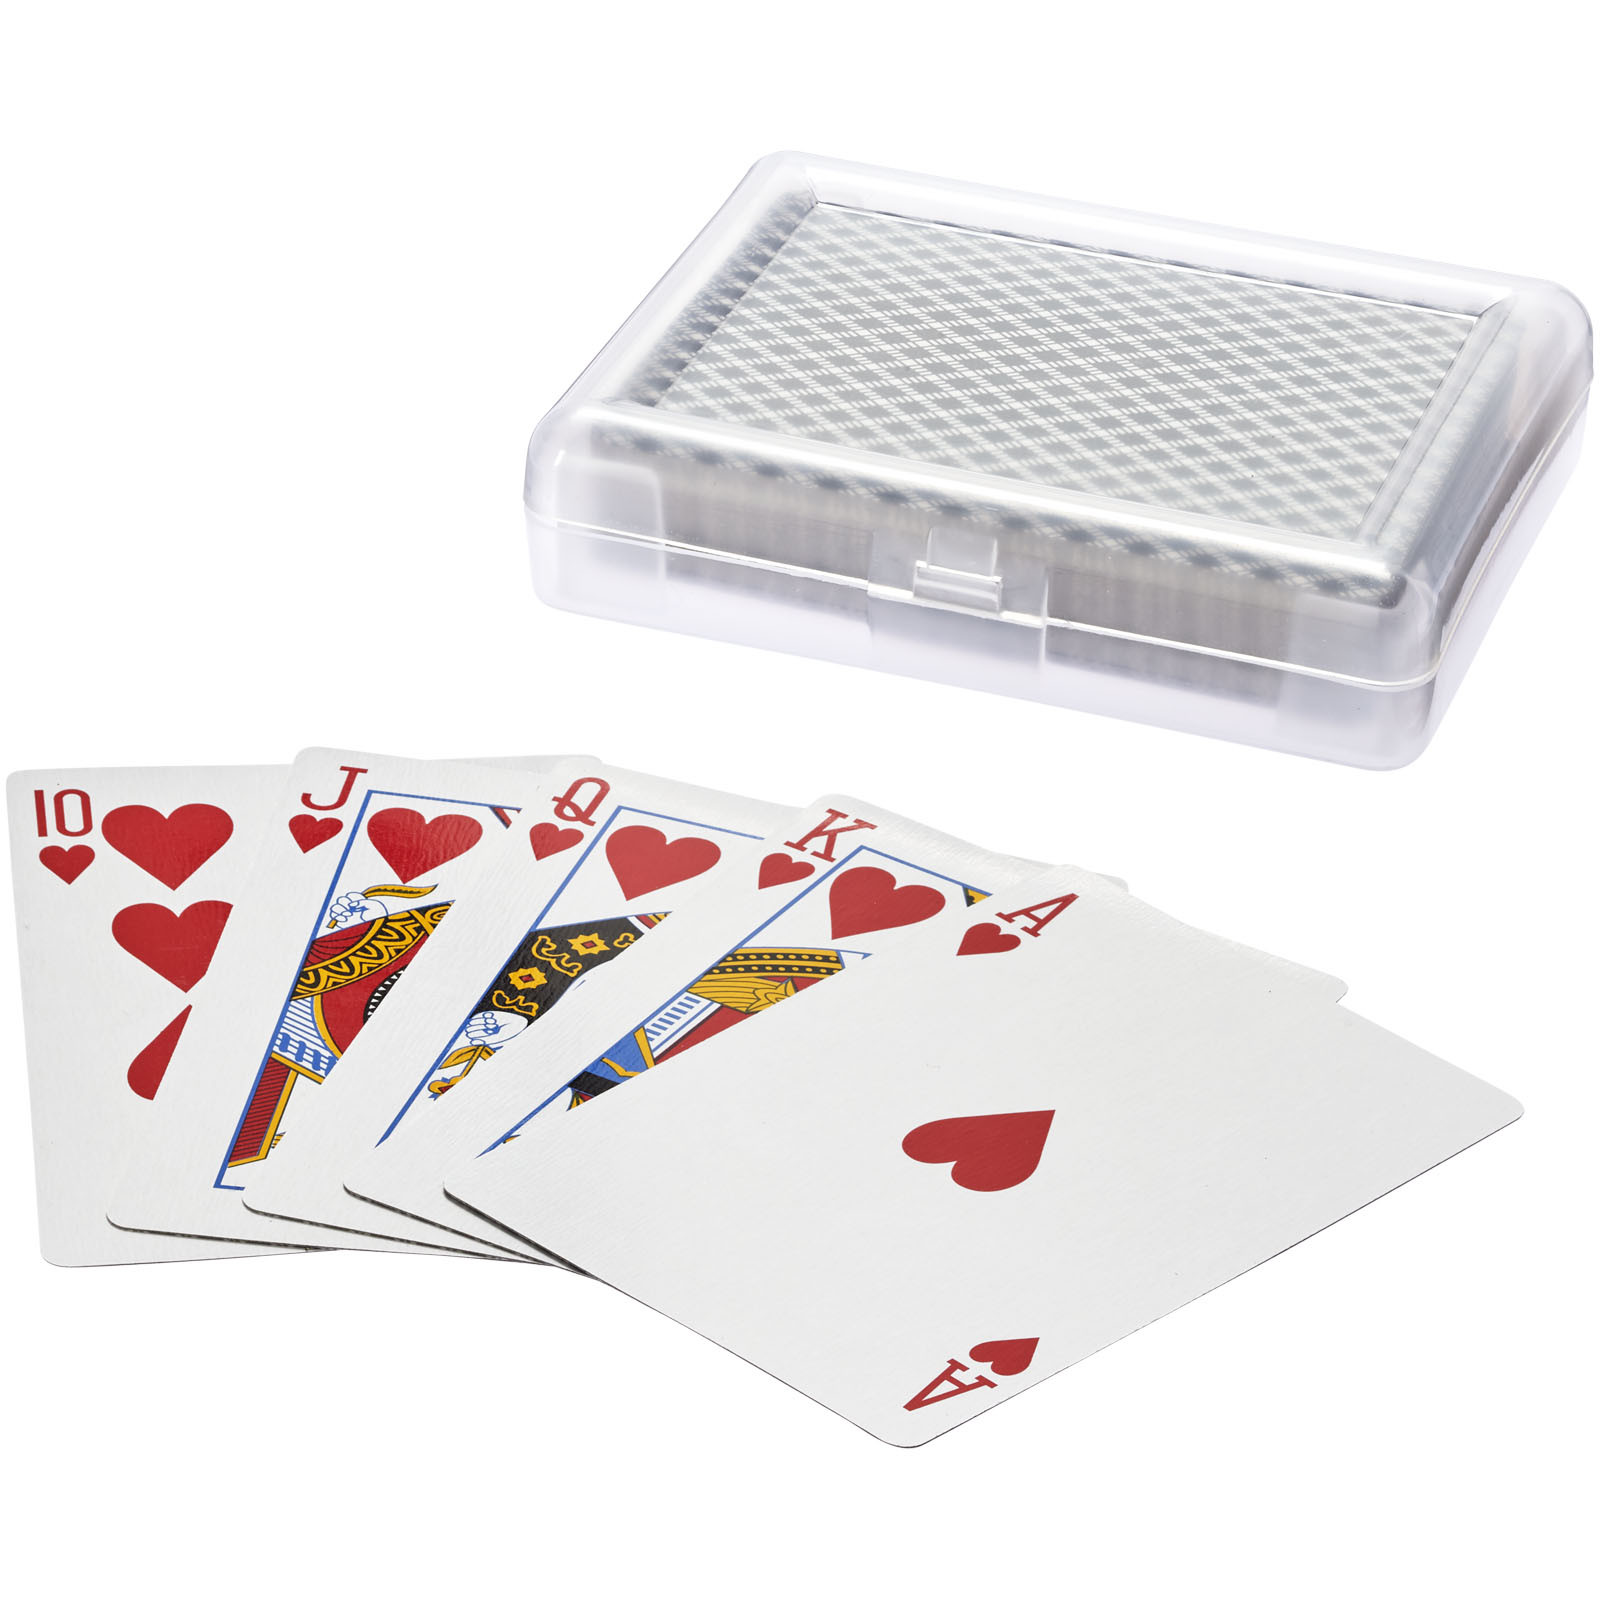 Toys & Games - Reno playing cards set in case